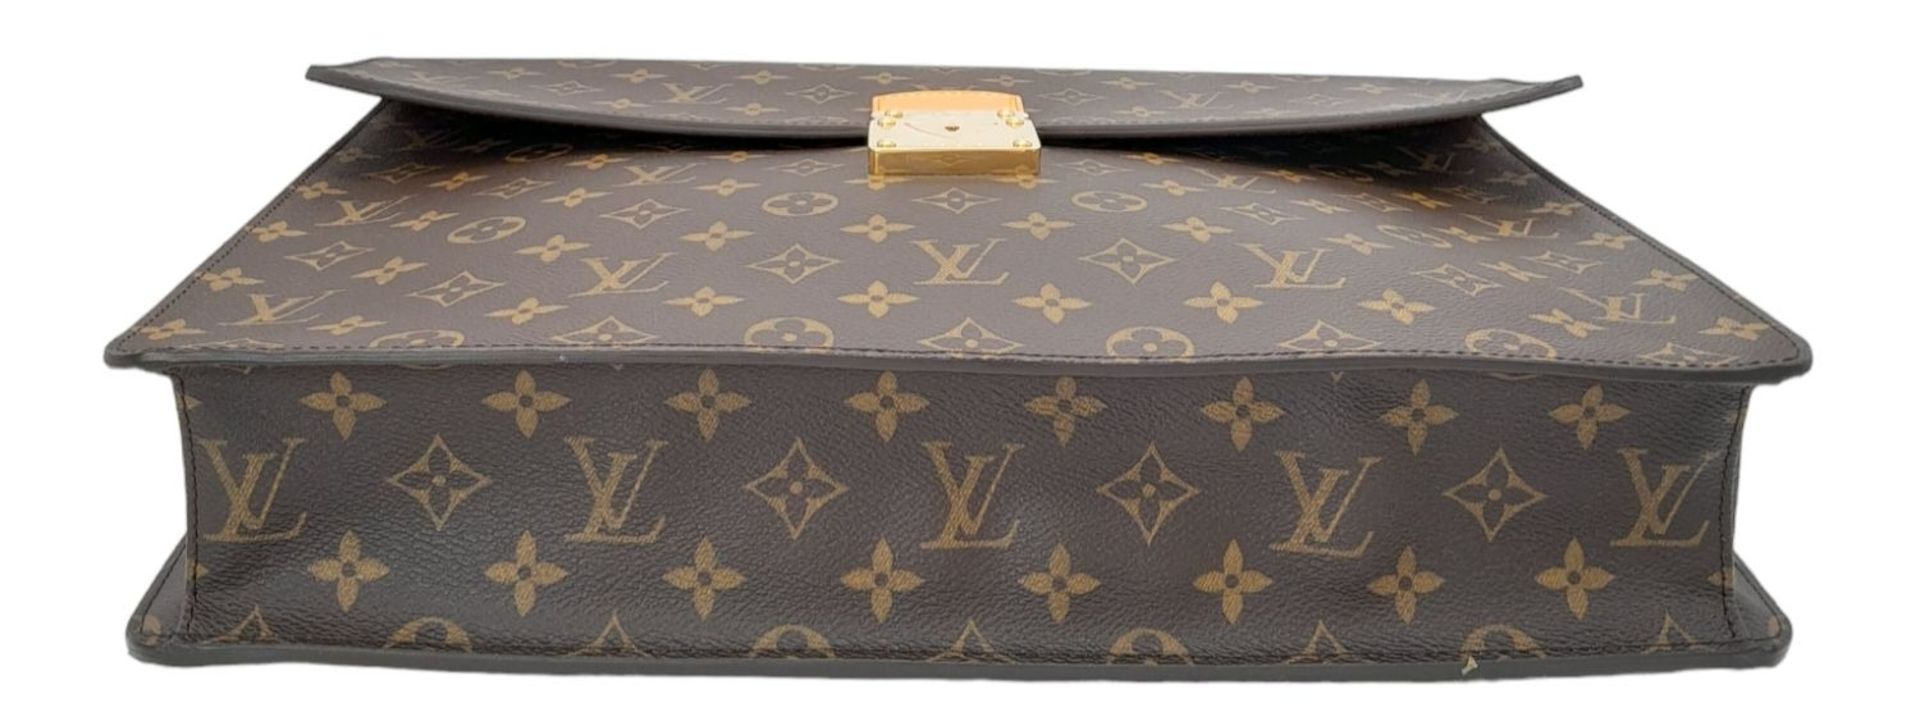 AN IMMACULATE LOUIS VUITTON CLASSIC BRIEF CASE IN UNUSED CONDITION WITH ORIGINAL DUST COVER . 38 X - Bild 9 aus 10